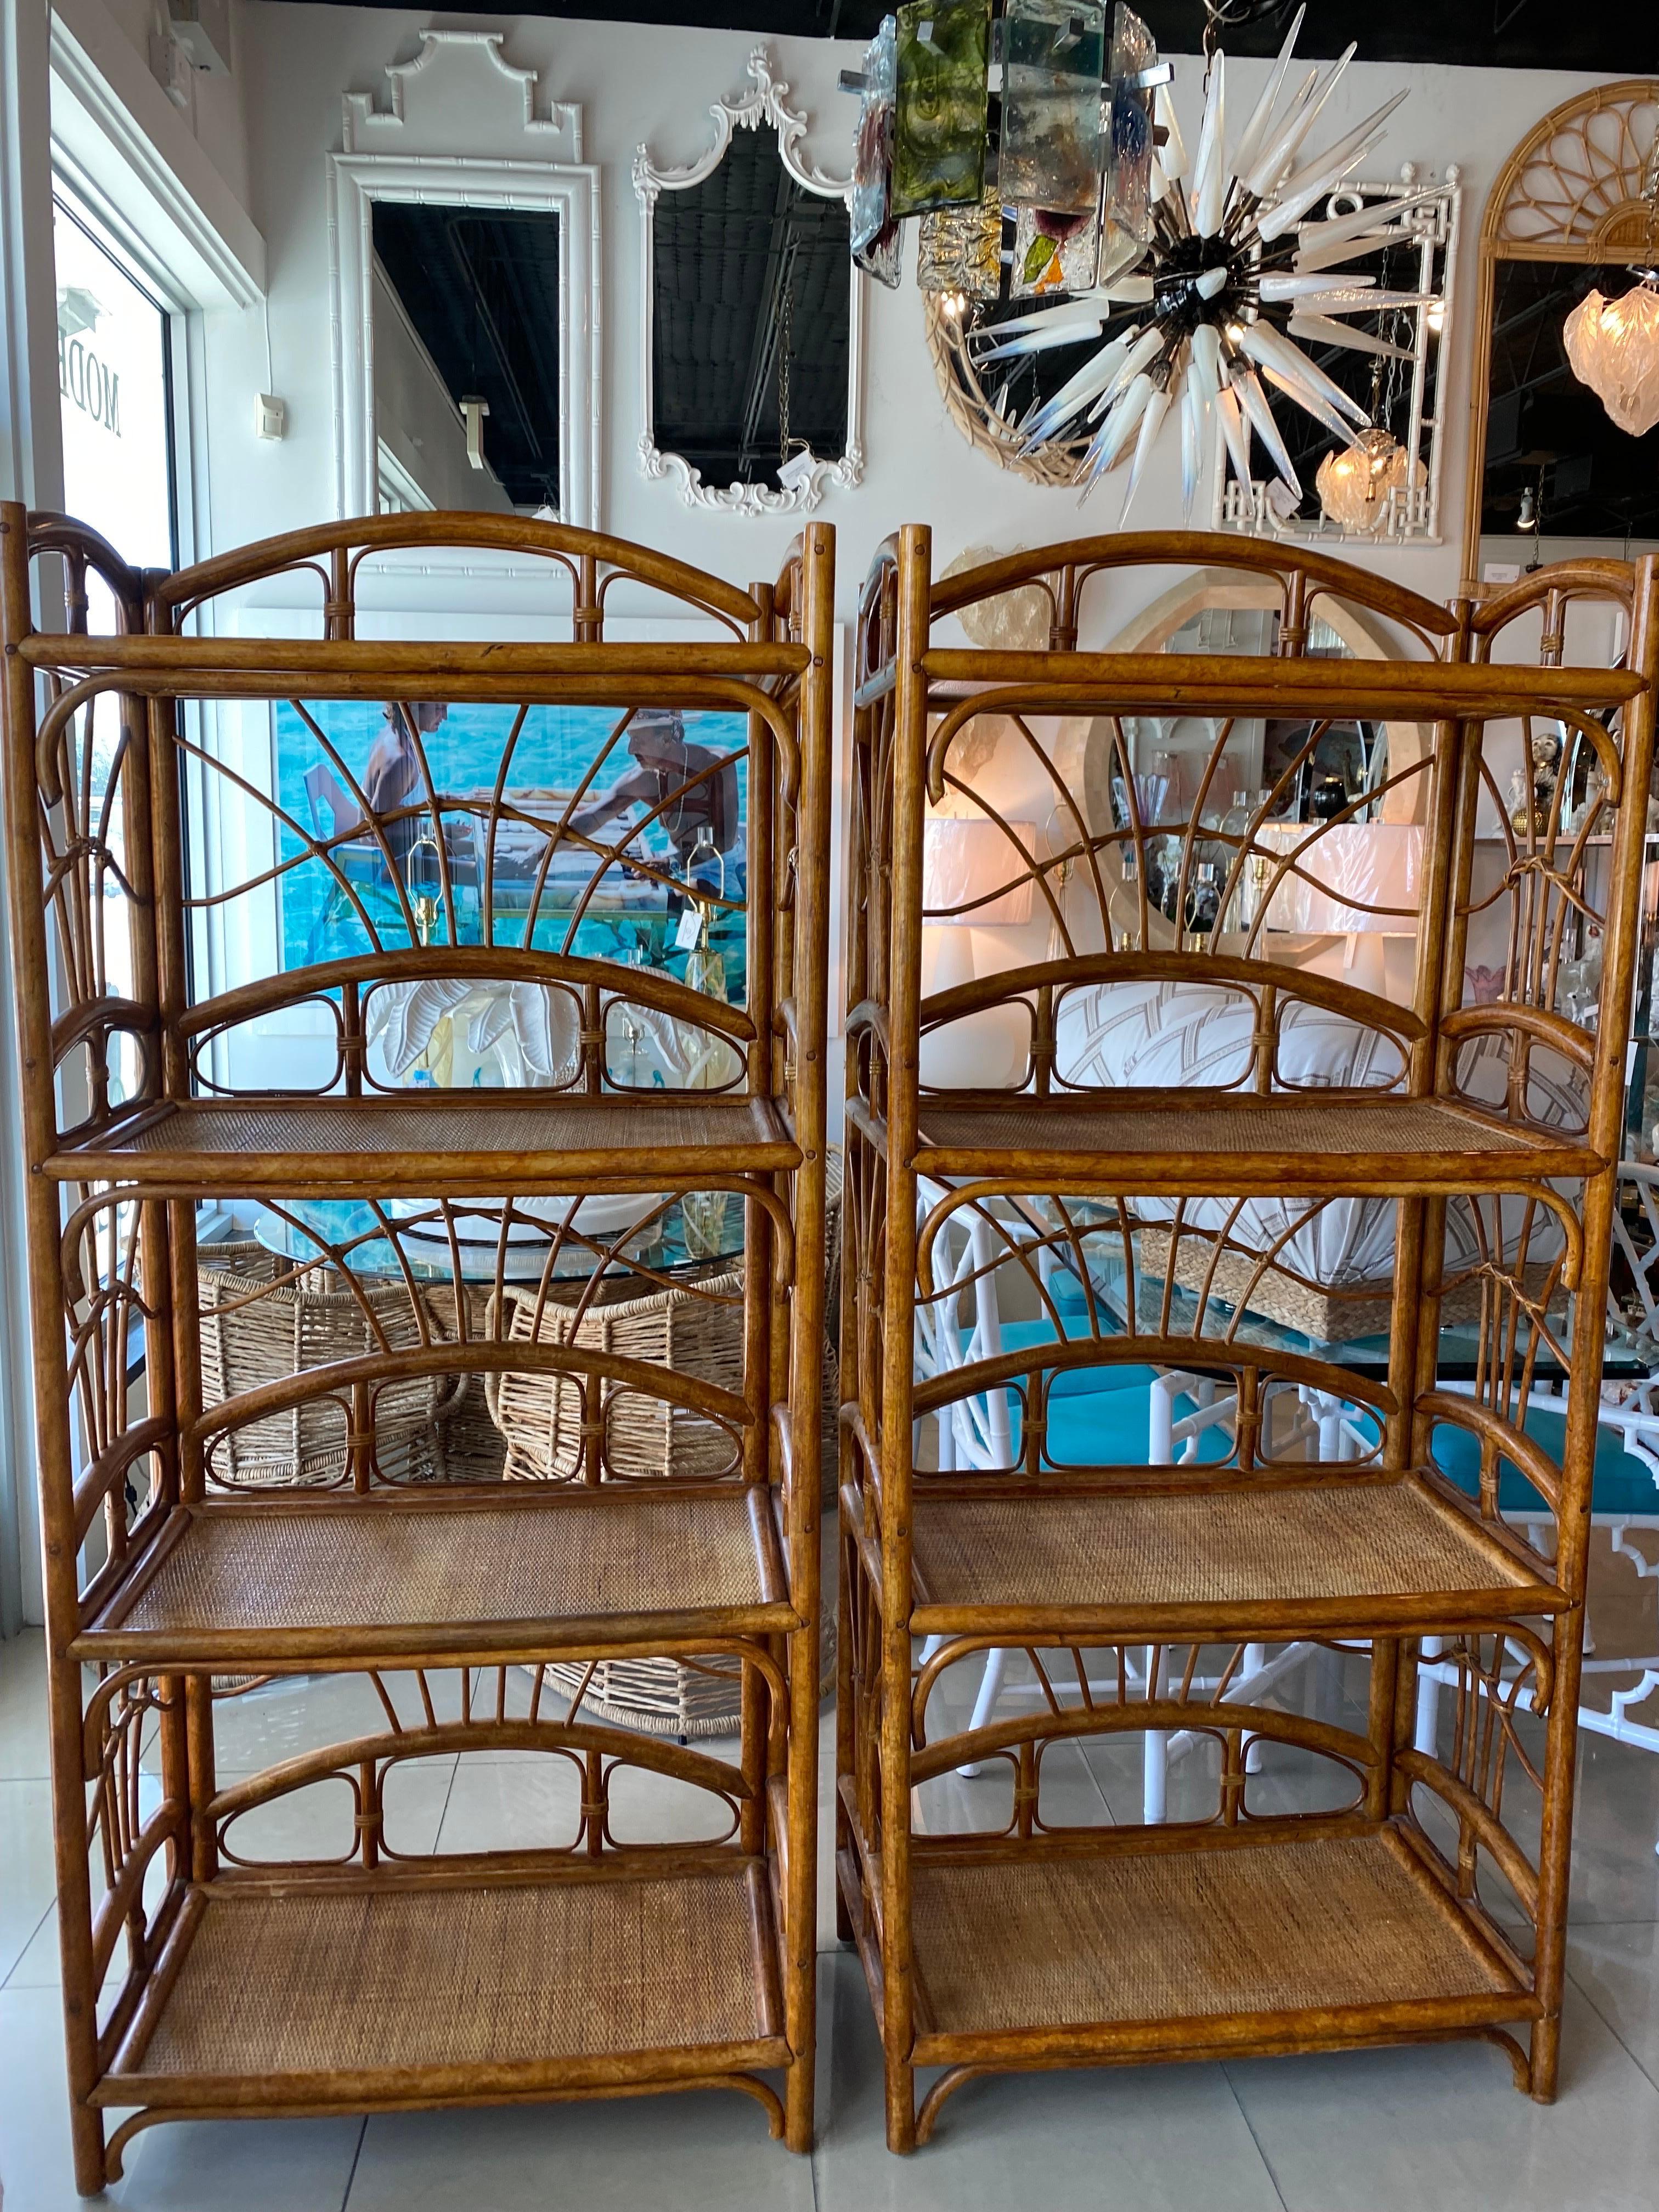 Vintage pair of rattan etageres with woven cane shelves. Original finish. Please let me know if you need an additional shipping quote. Dimensions are 72 H x 32 W x 16 D.